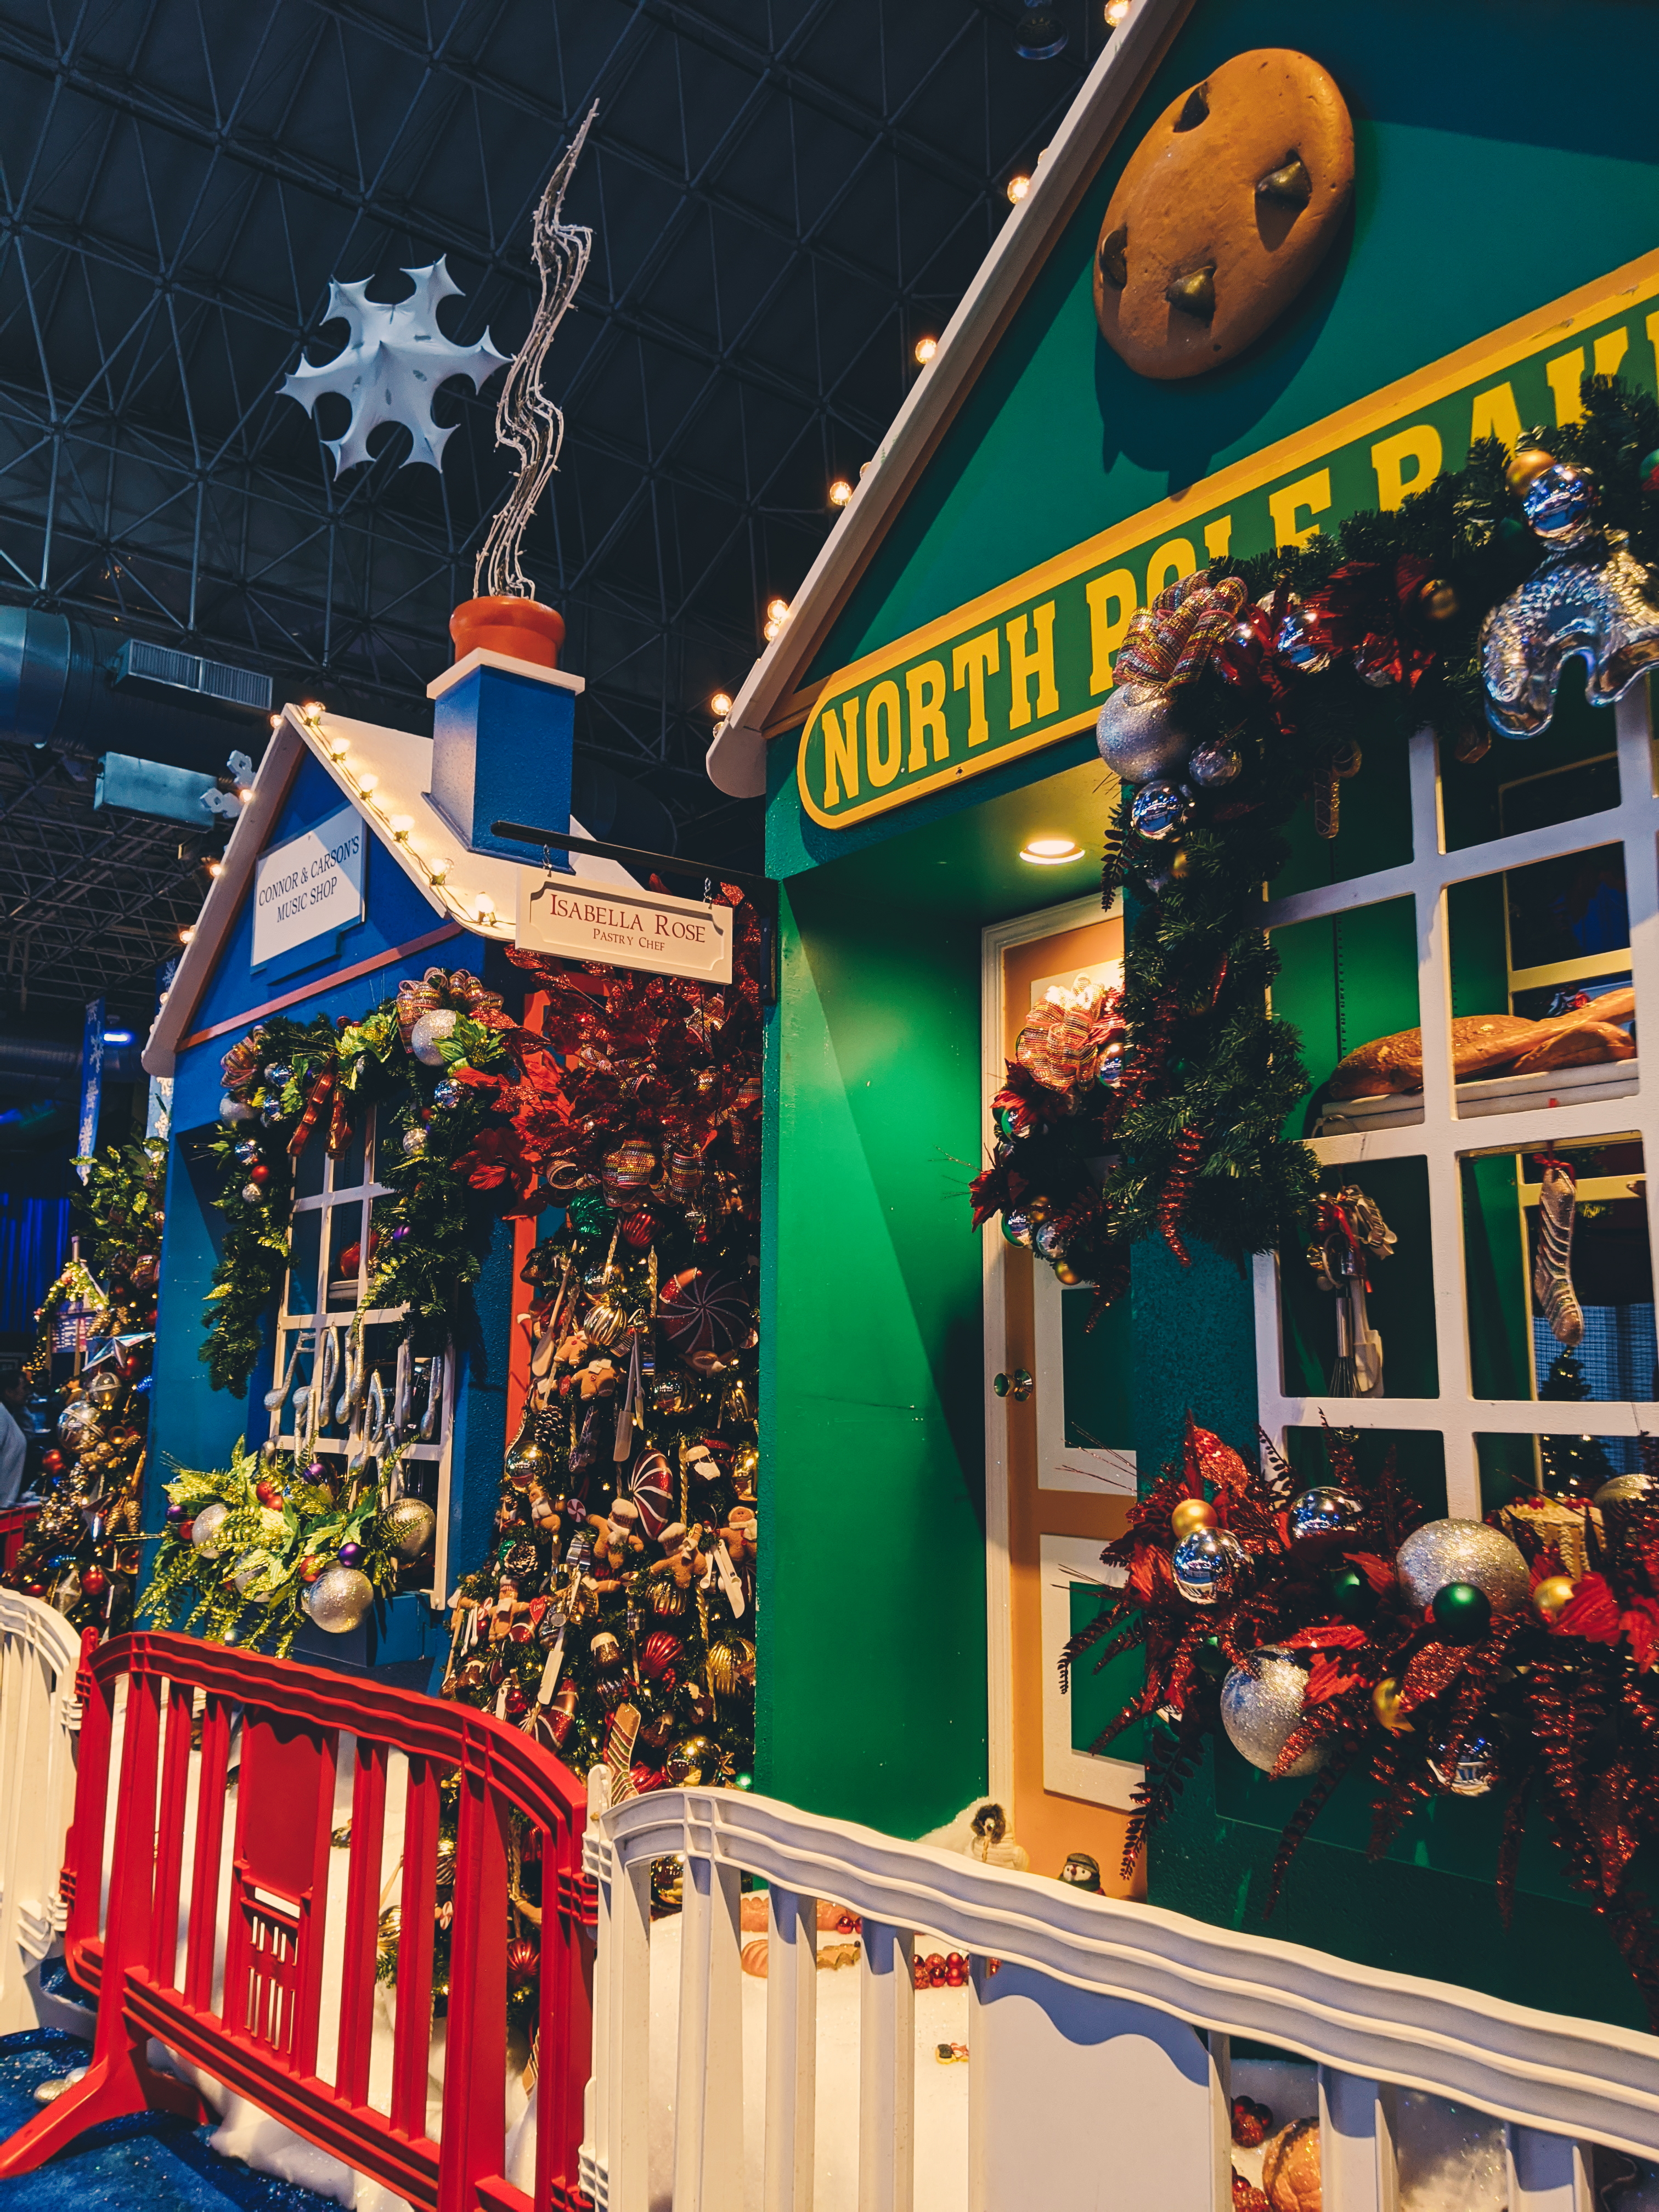 Winter Wonderfest Navy Pier - Chicago Holiday Events: Navy Pier Winter Wonderfest is one of the best family-friendly Chicago activities during the holidays! Find out the best times to go to Winter Wonderfest and sneak a peek inside the magic! #WWF19 #chicago #navypier 